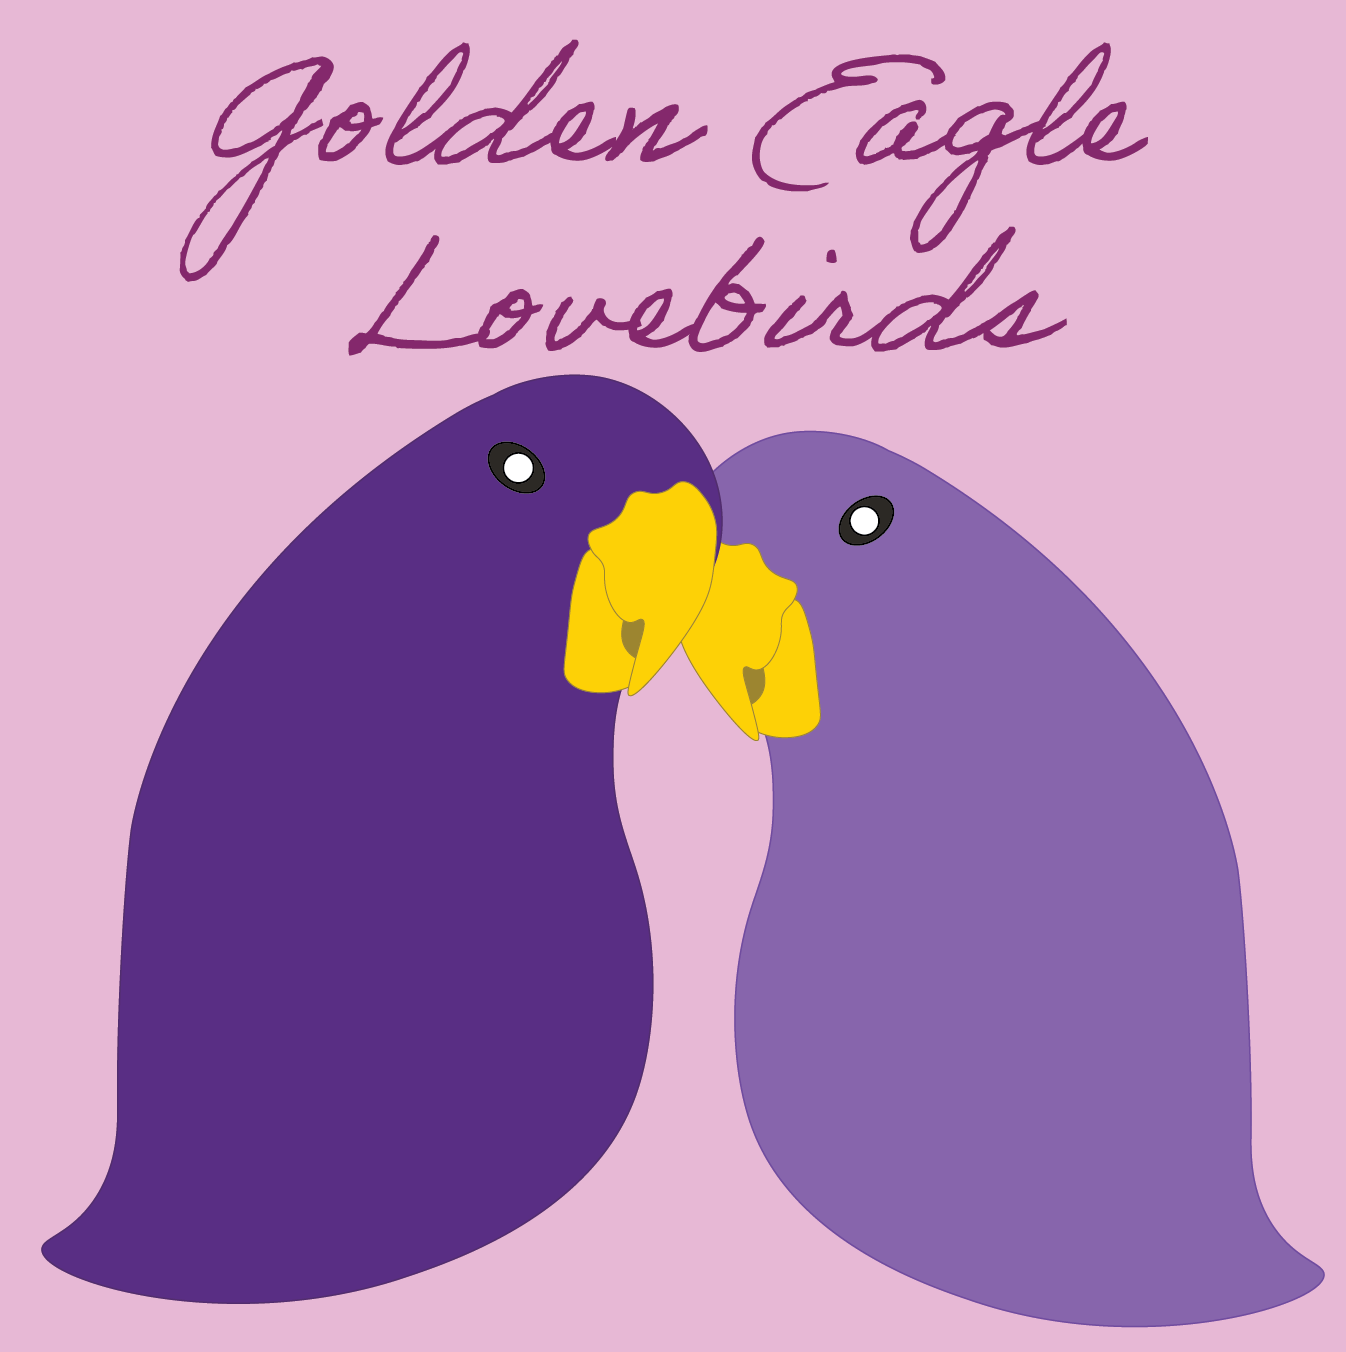 a graphic of two purple lovebirds that reads "Golden Eagle Lovebirds"